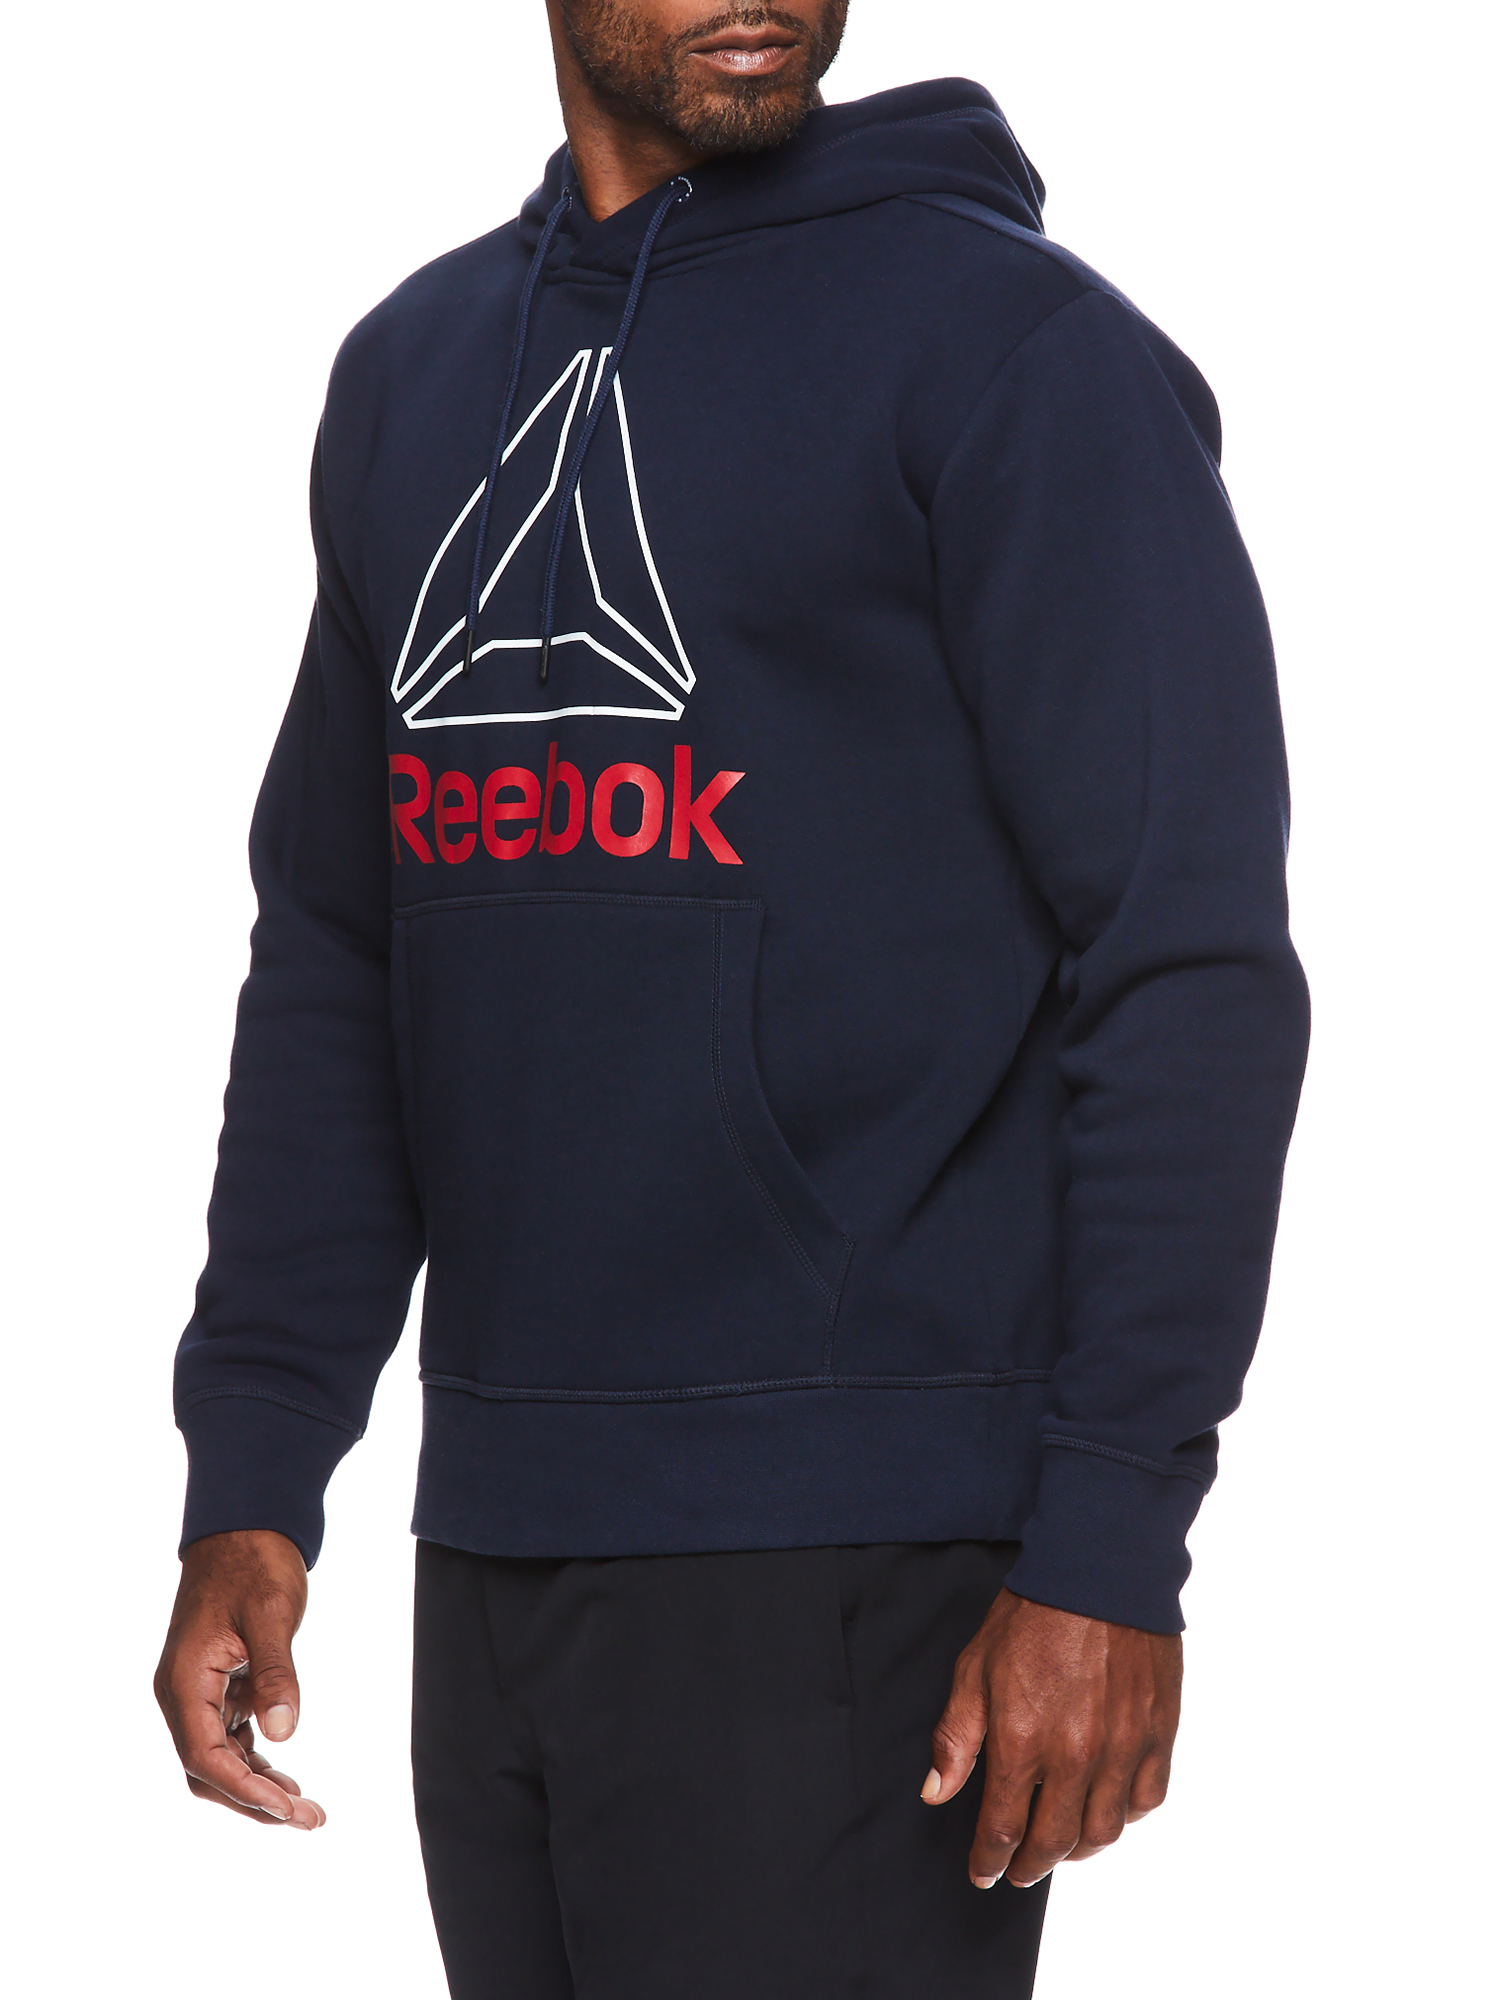 Reebok Mens and Big Mens Active Pullover Fleece Hoodie, Up to 3XL - image 2 of 5